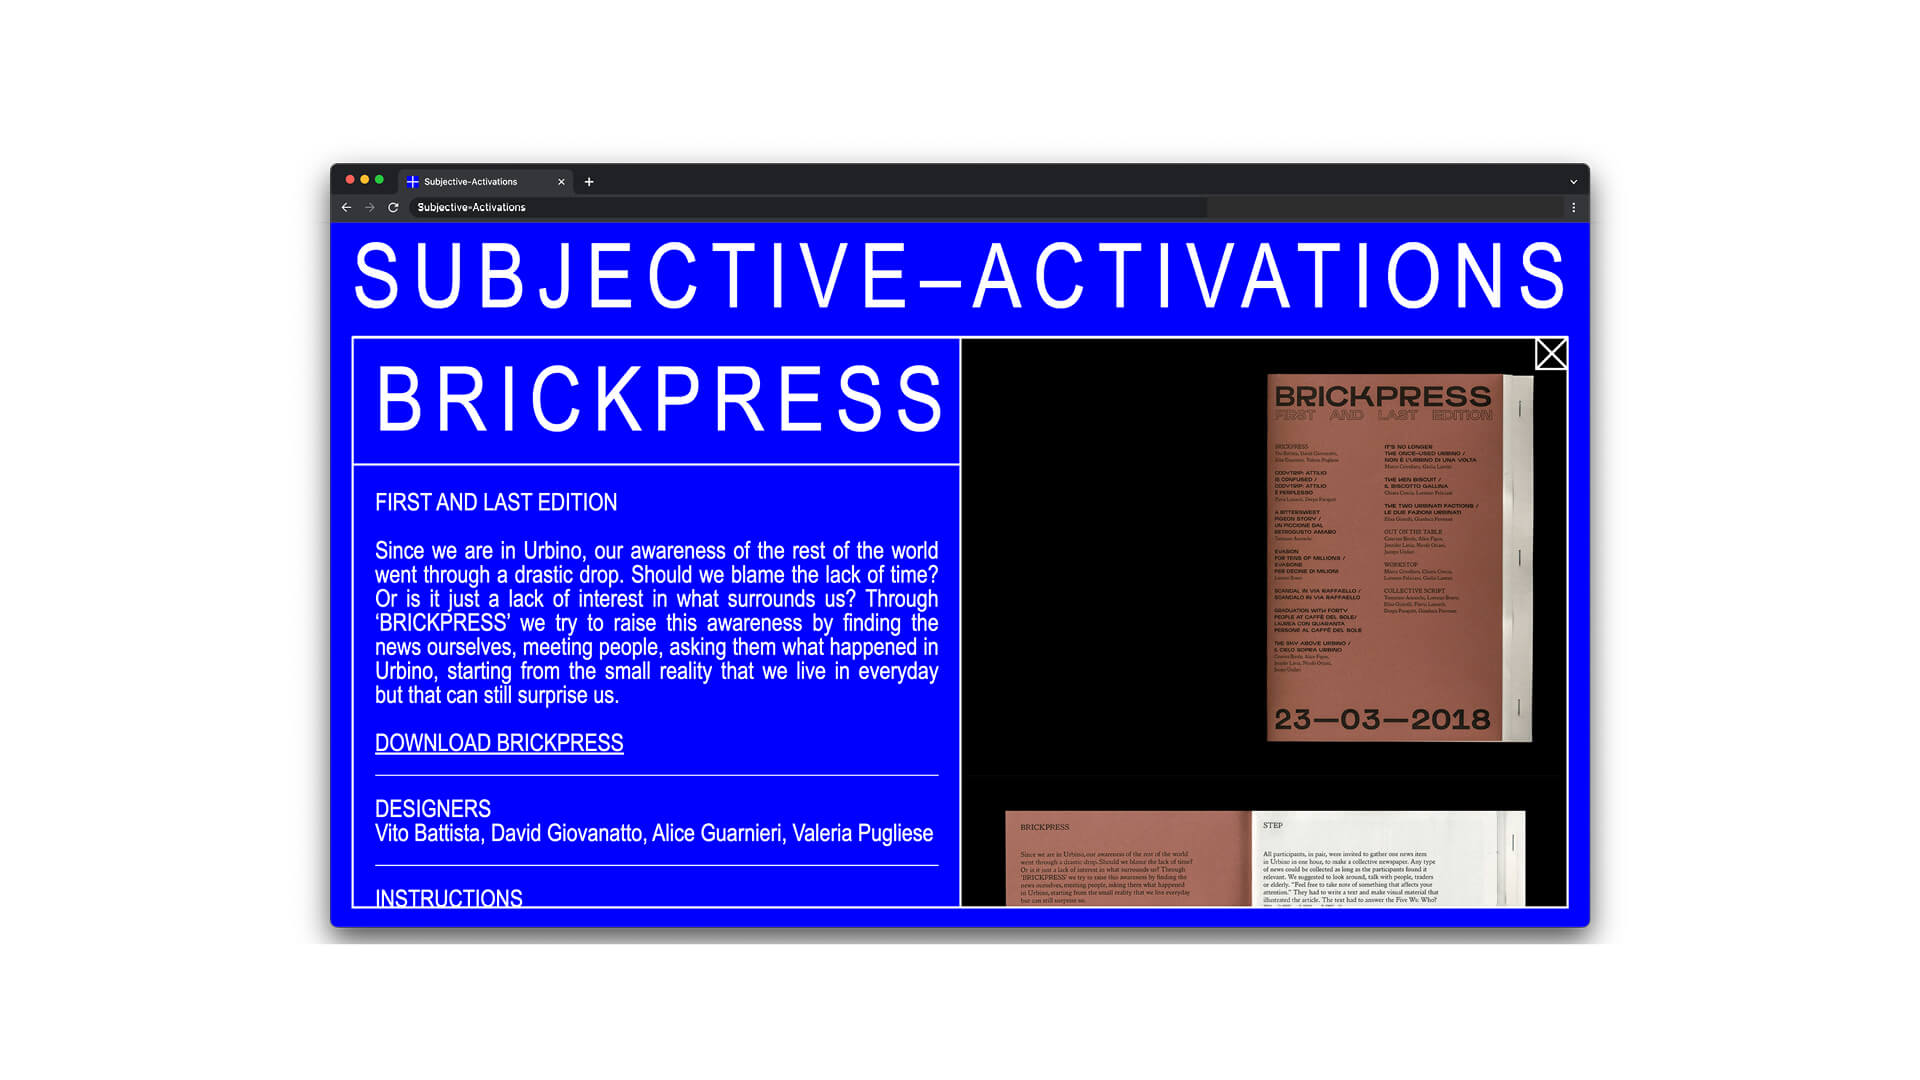 Subjective Activation website page created for the Brickpress workshop